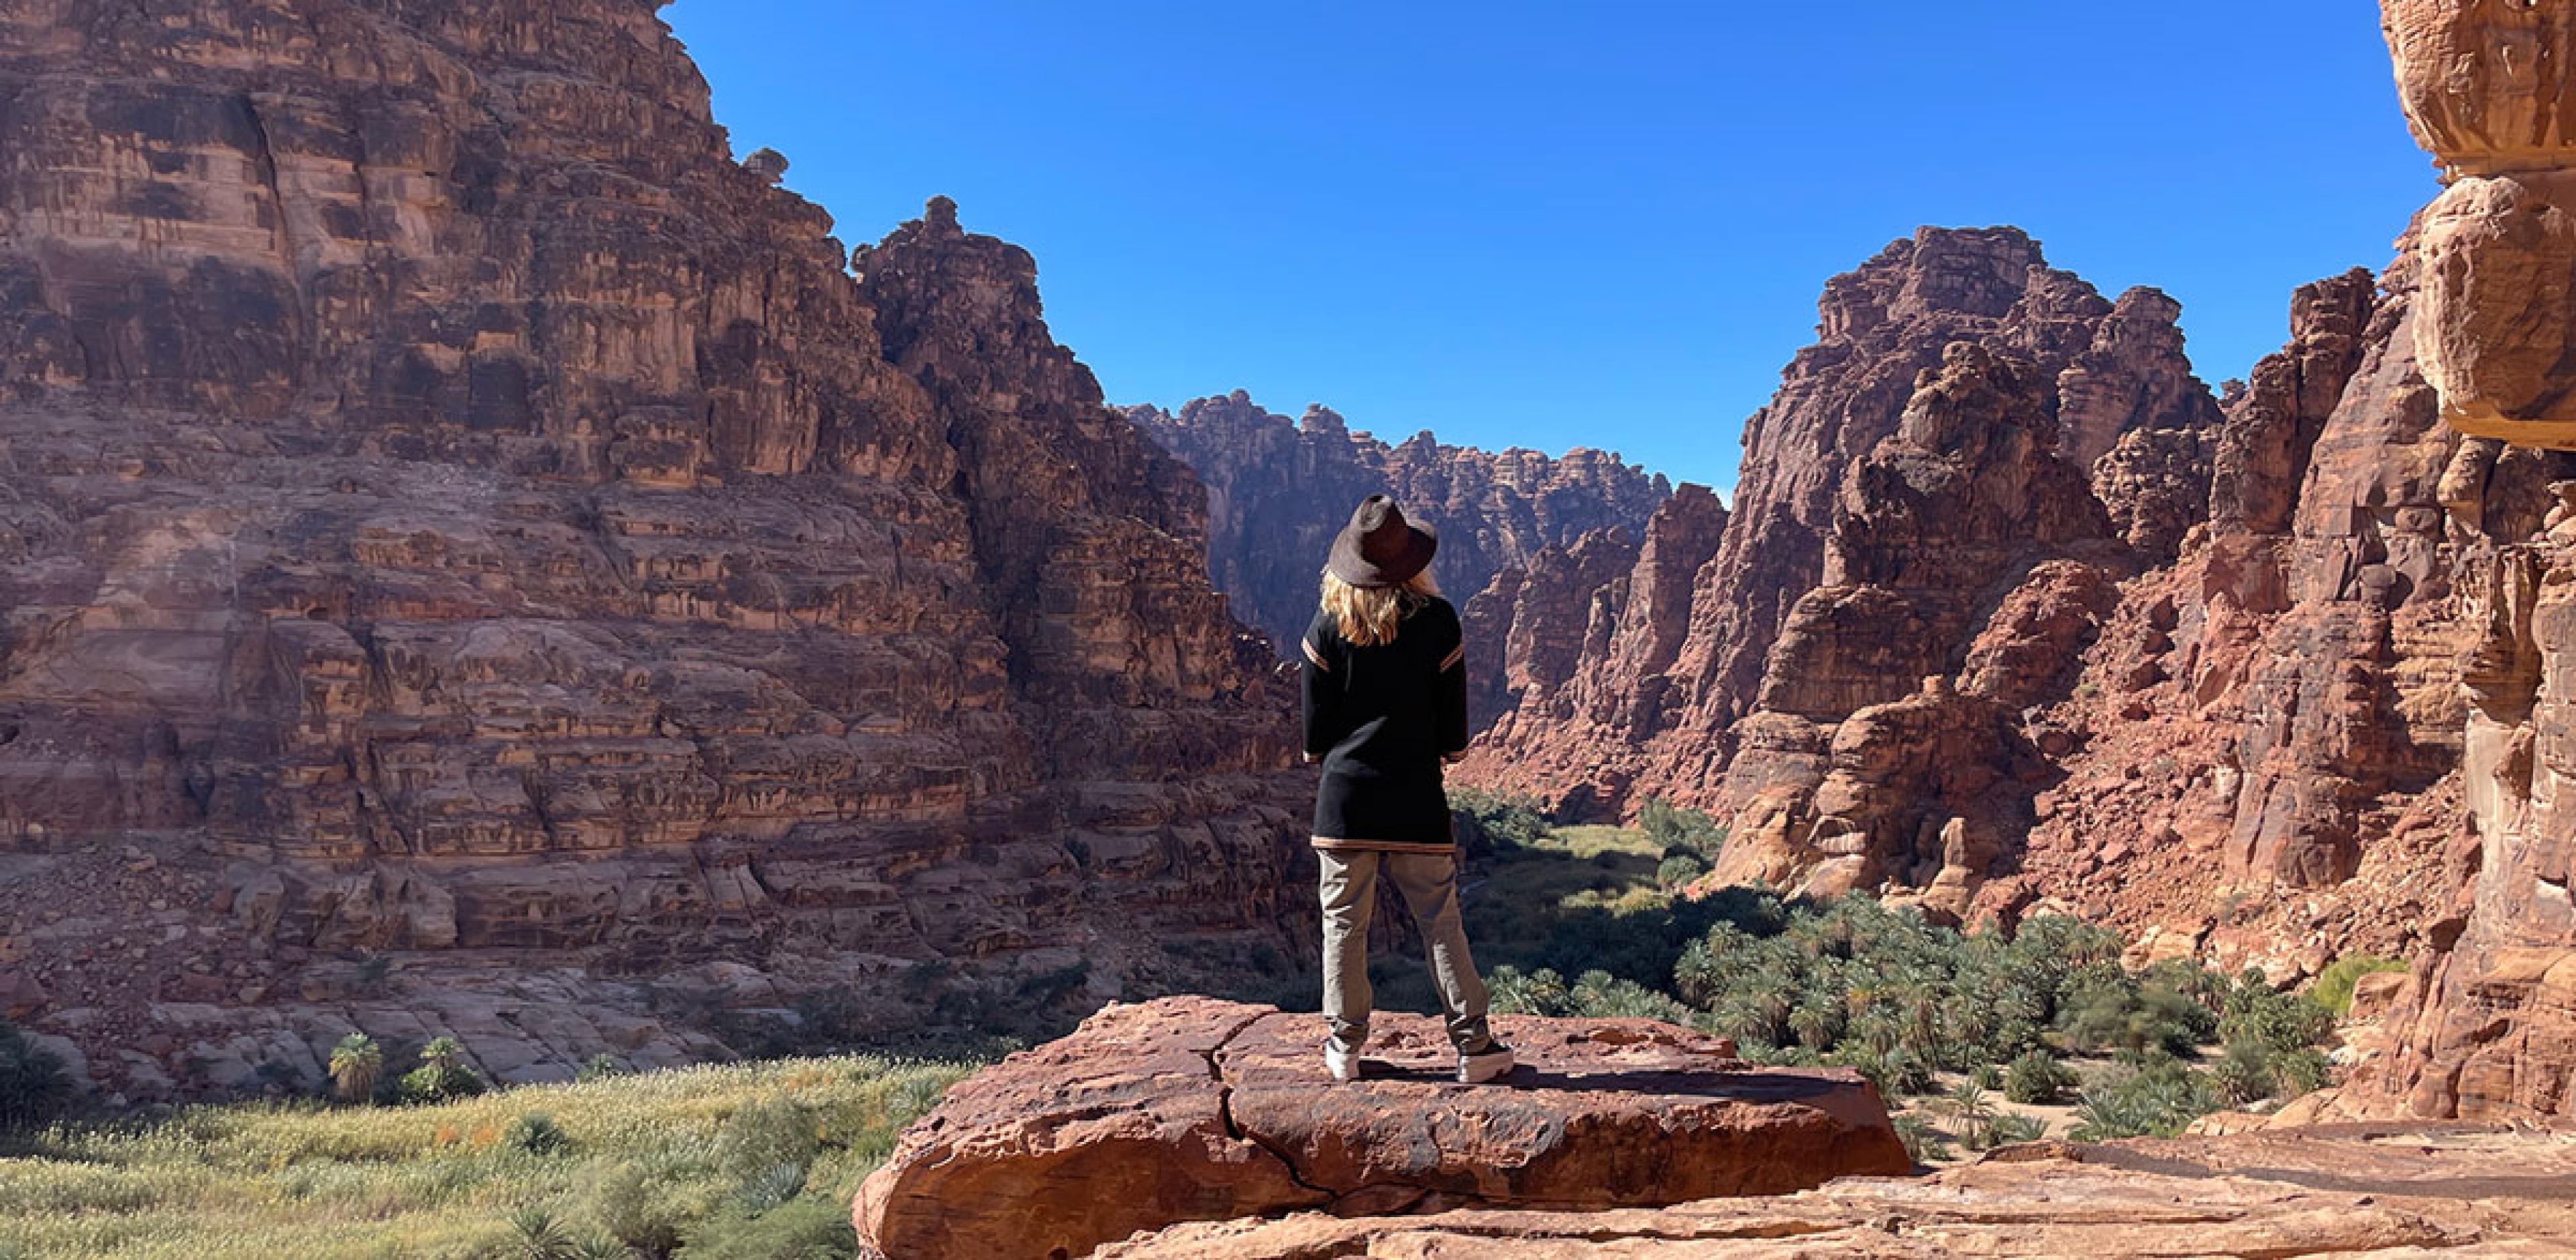 woman stands on edge of rocky cliff looking out over red rock canyon in saudi arabia